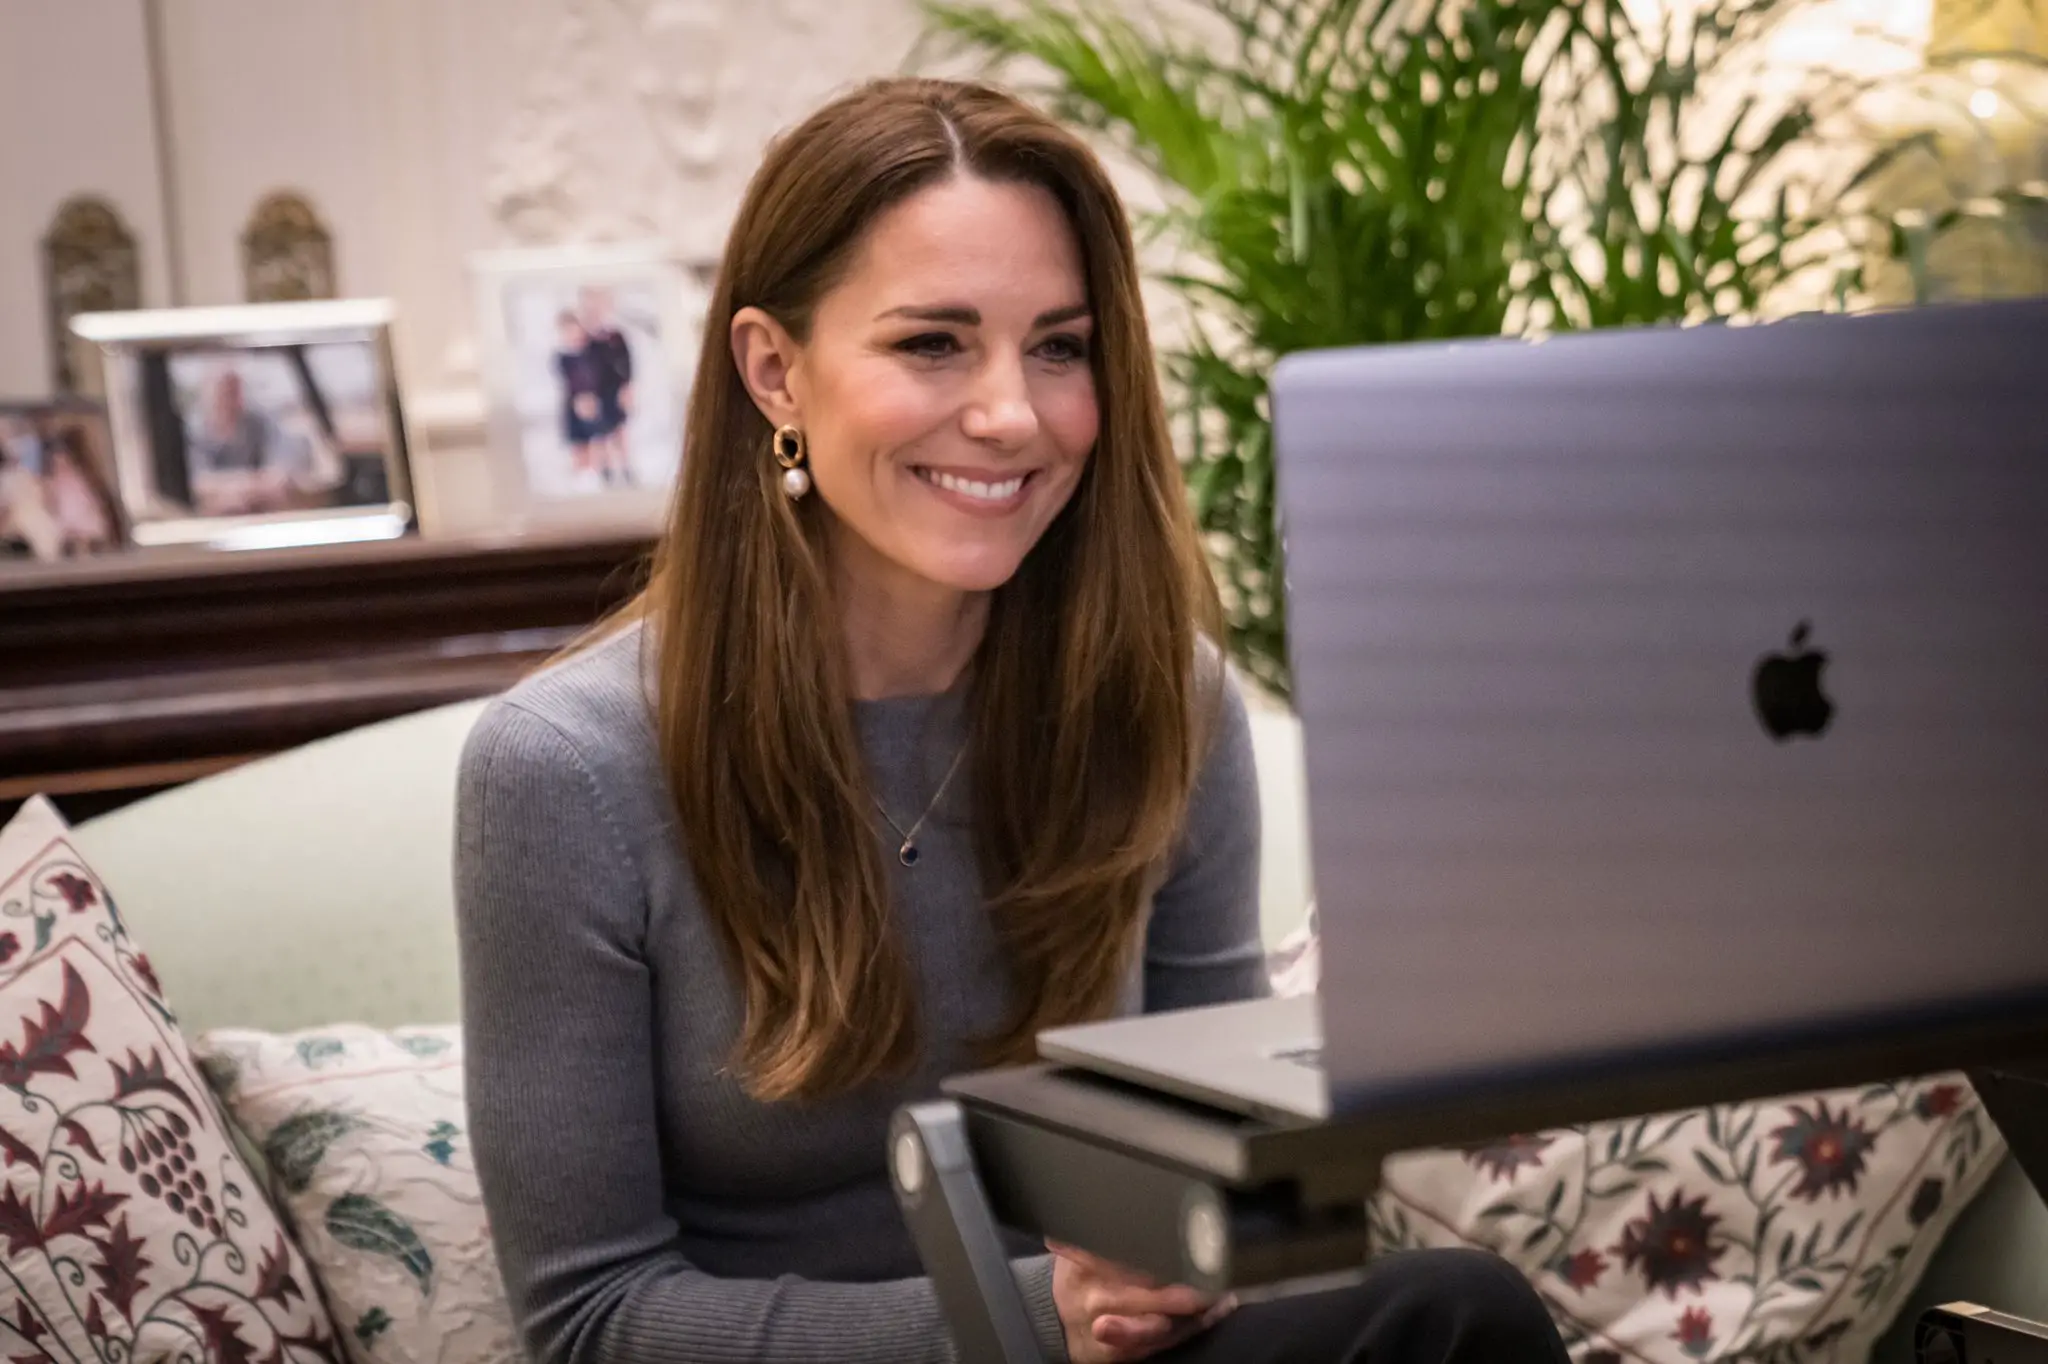 The Duchess of Cambridge marked Holocaust Memorial day with a video call to two Holocaust Survivors Zigi Shipper and Manfred Goldberg whom she met in 2017 during Polnd visit